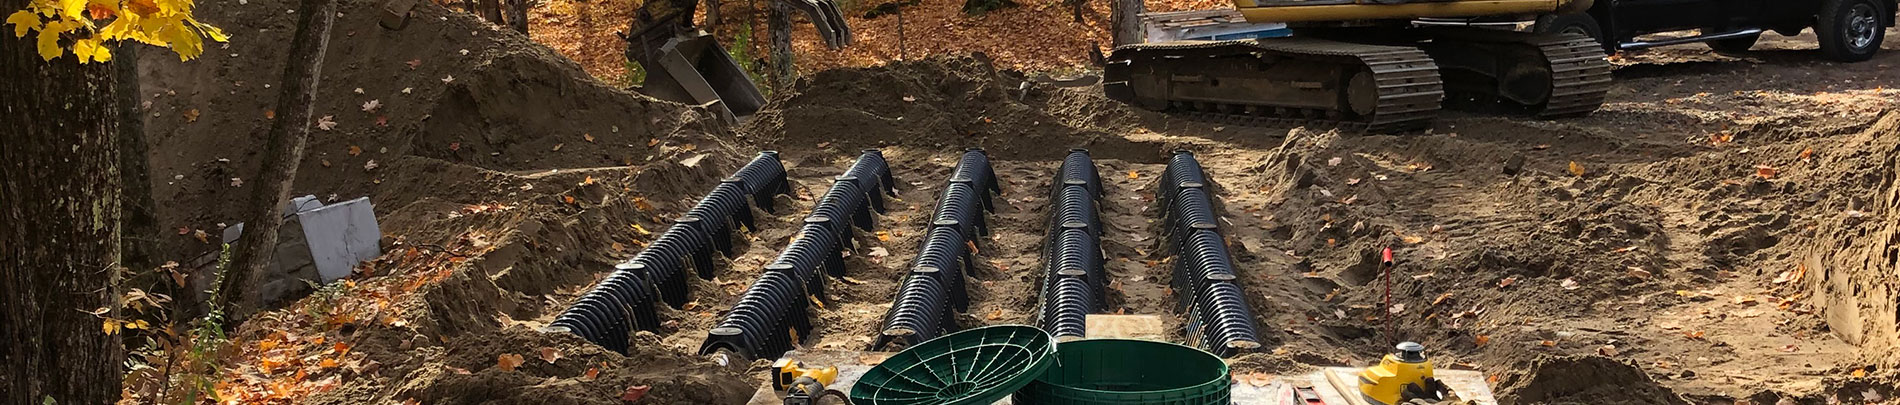 A septic system being installed.